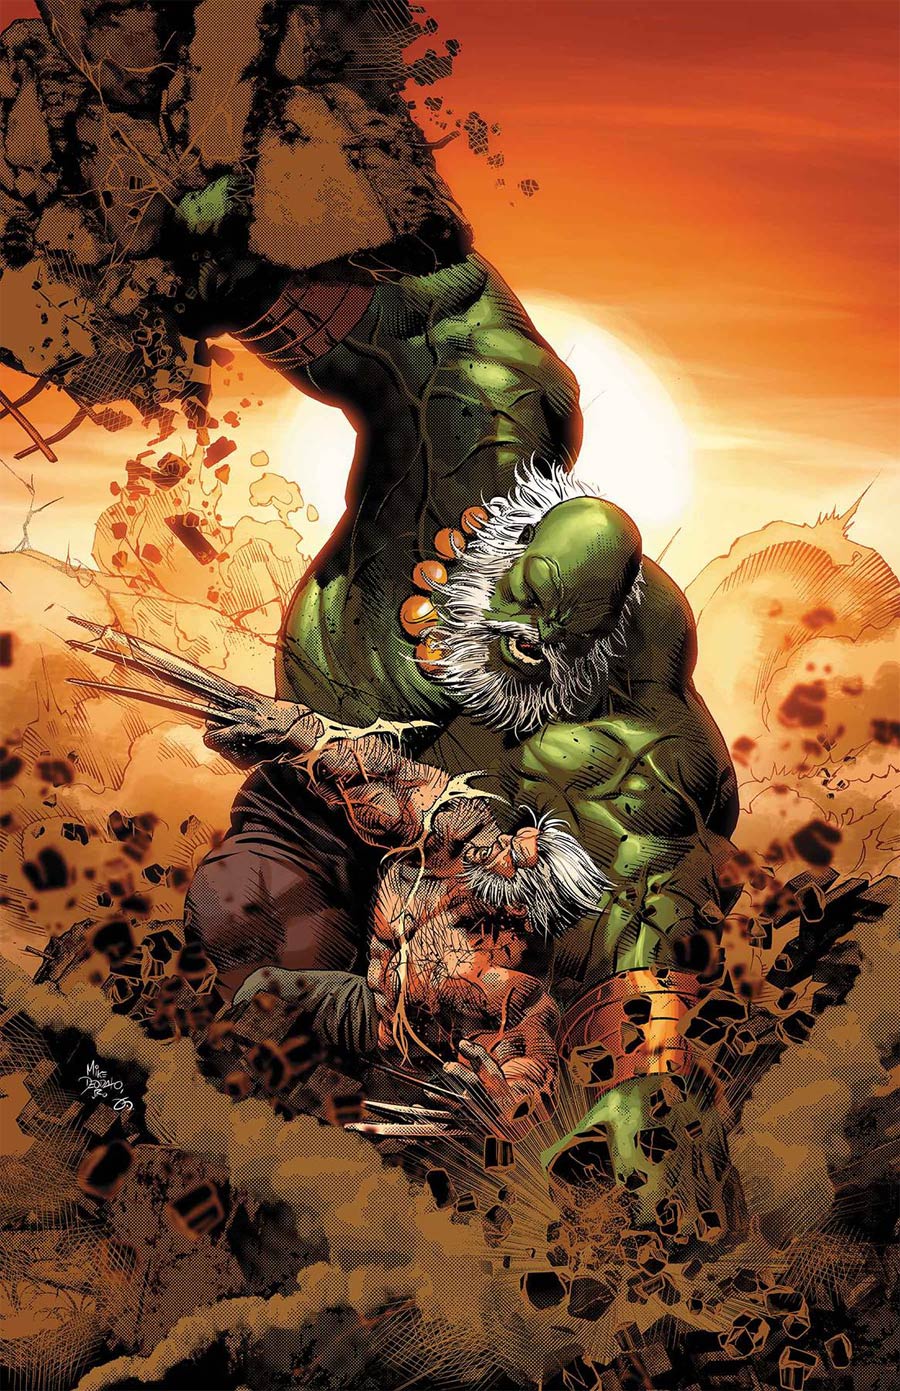 Old Man Logan Vol 2 #25 By Mike Deodato Jr Poster